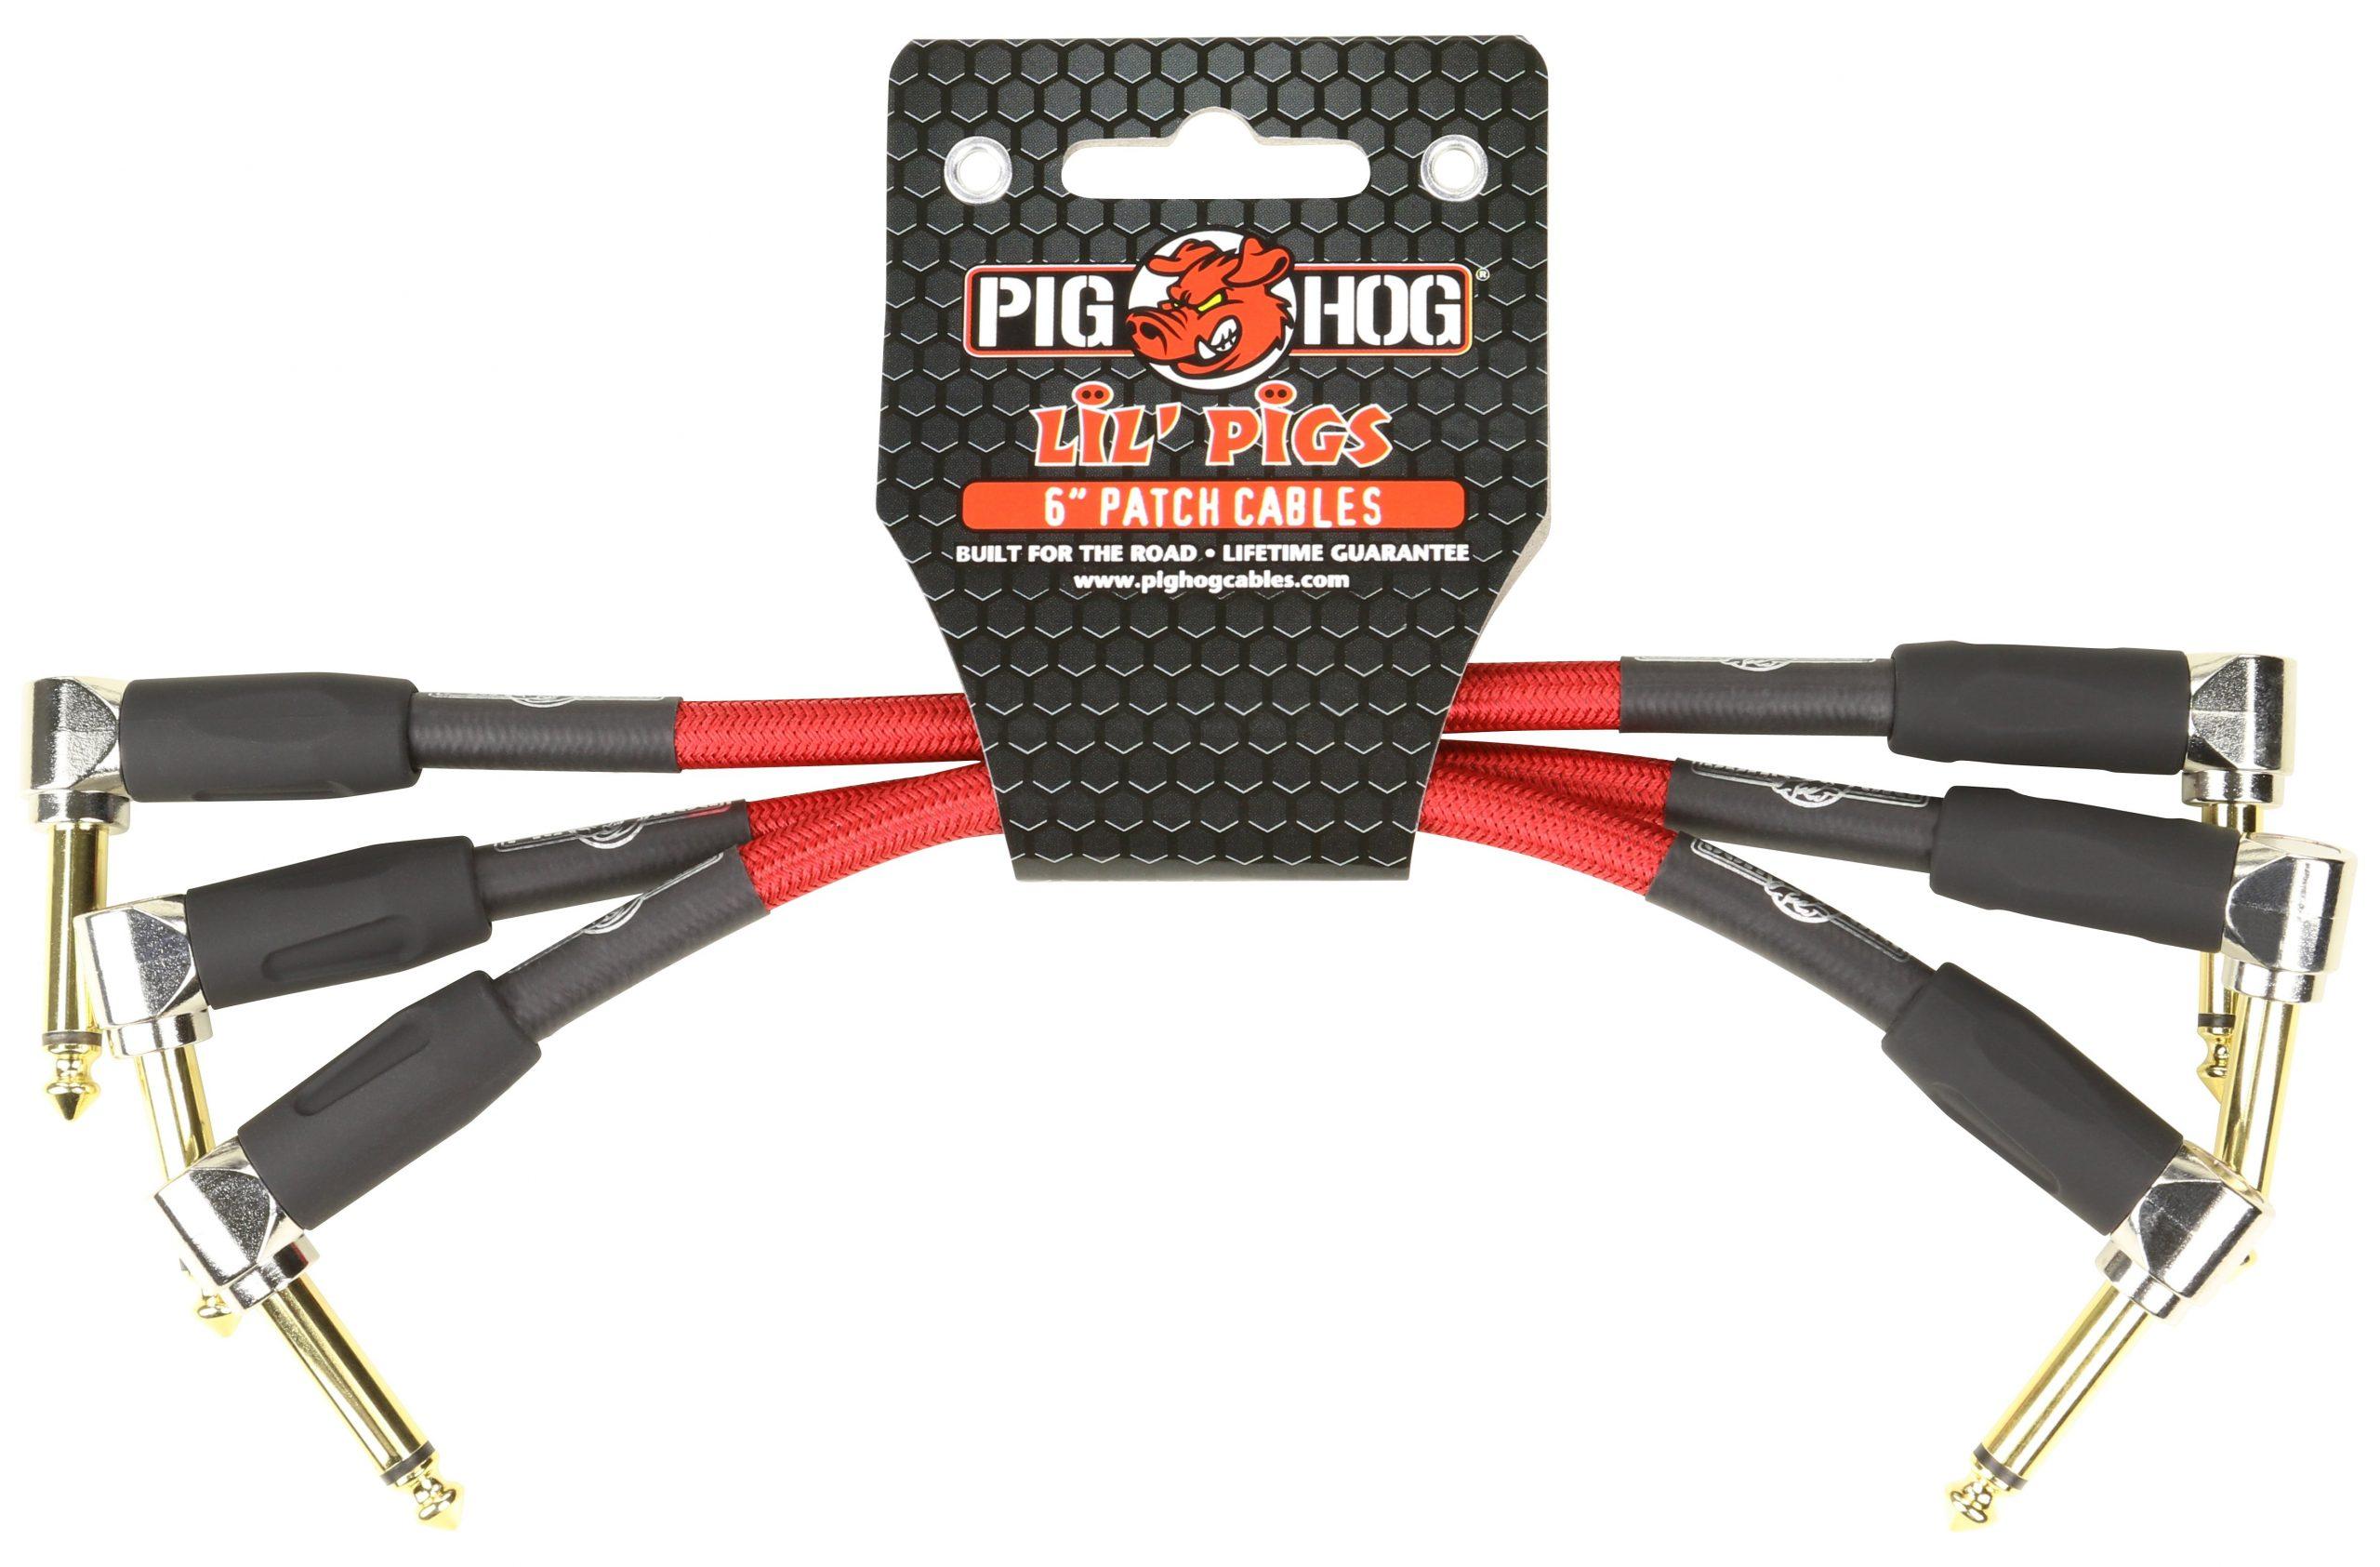 Pig Hog Lil Pigs Vintage "Candy Apple" 6in Patch Cables - 3 pack